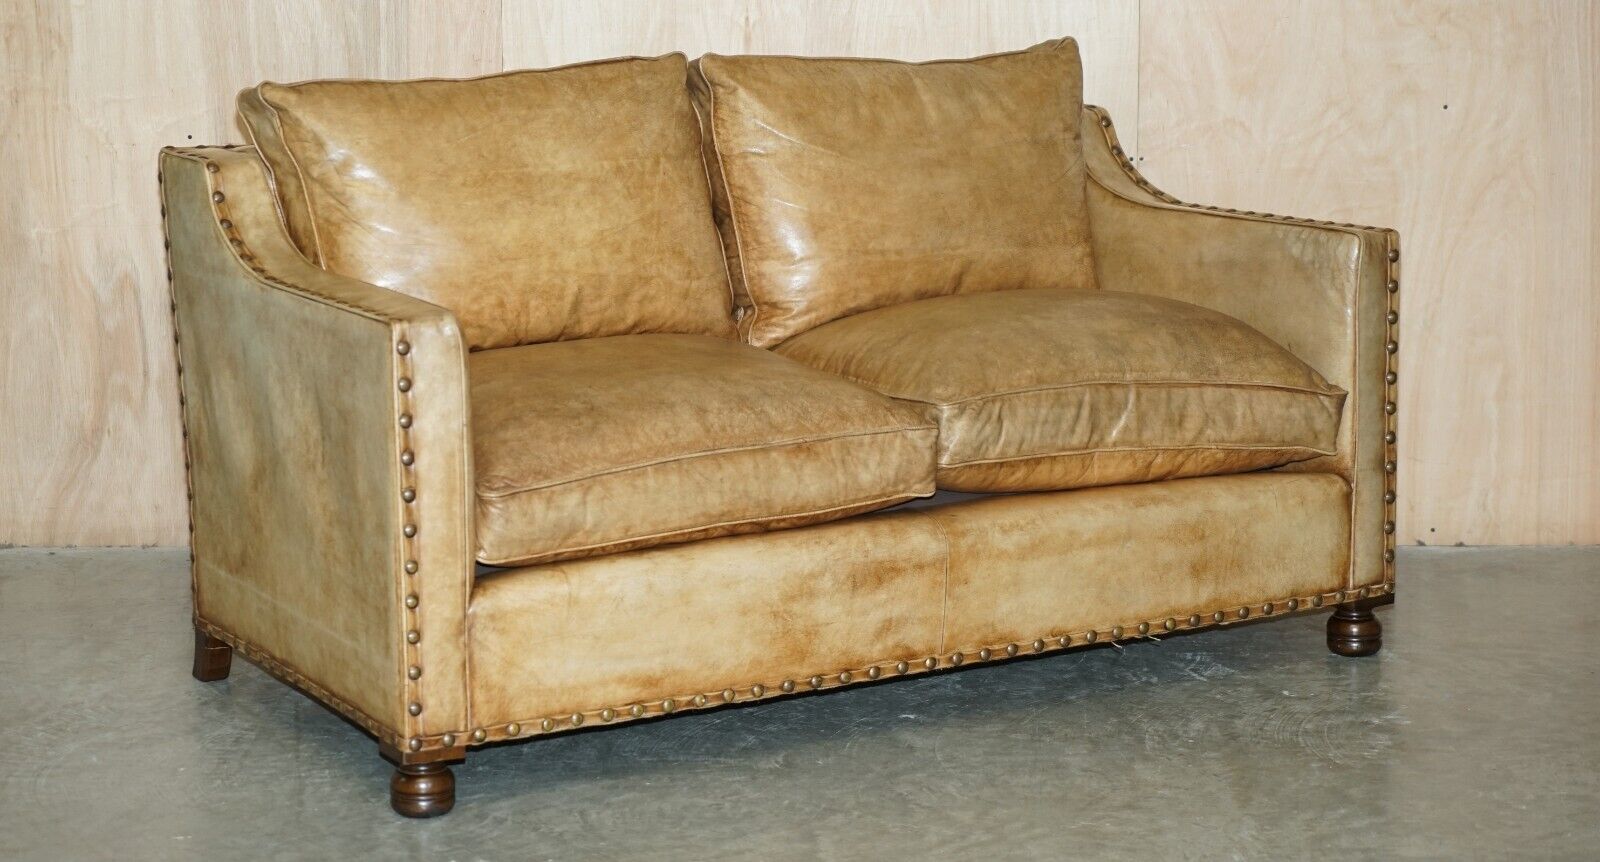 LOVELY HAND DYED HERITAGE BROWN LEATHER EDWARDIAN STYLE STUDDED TWO SEAT SOFA